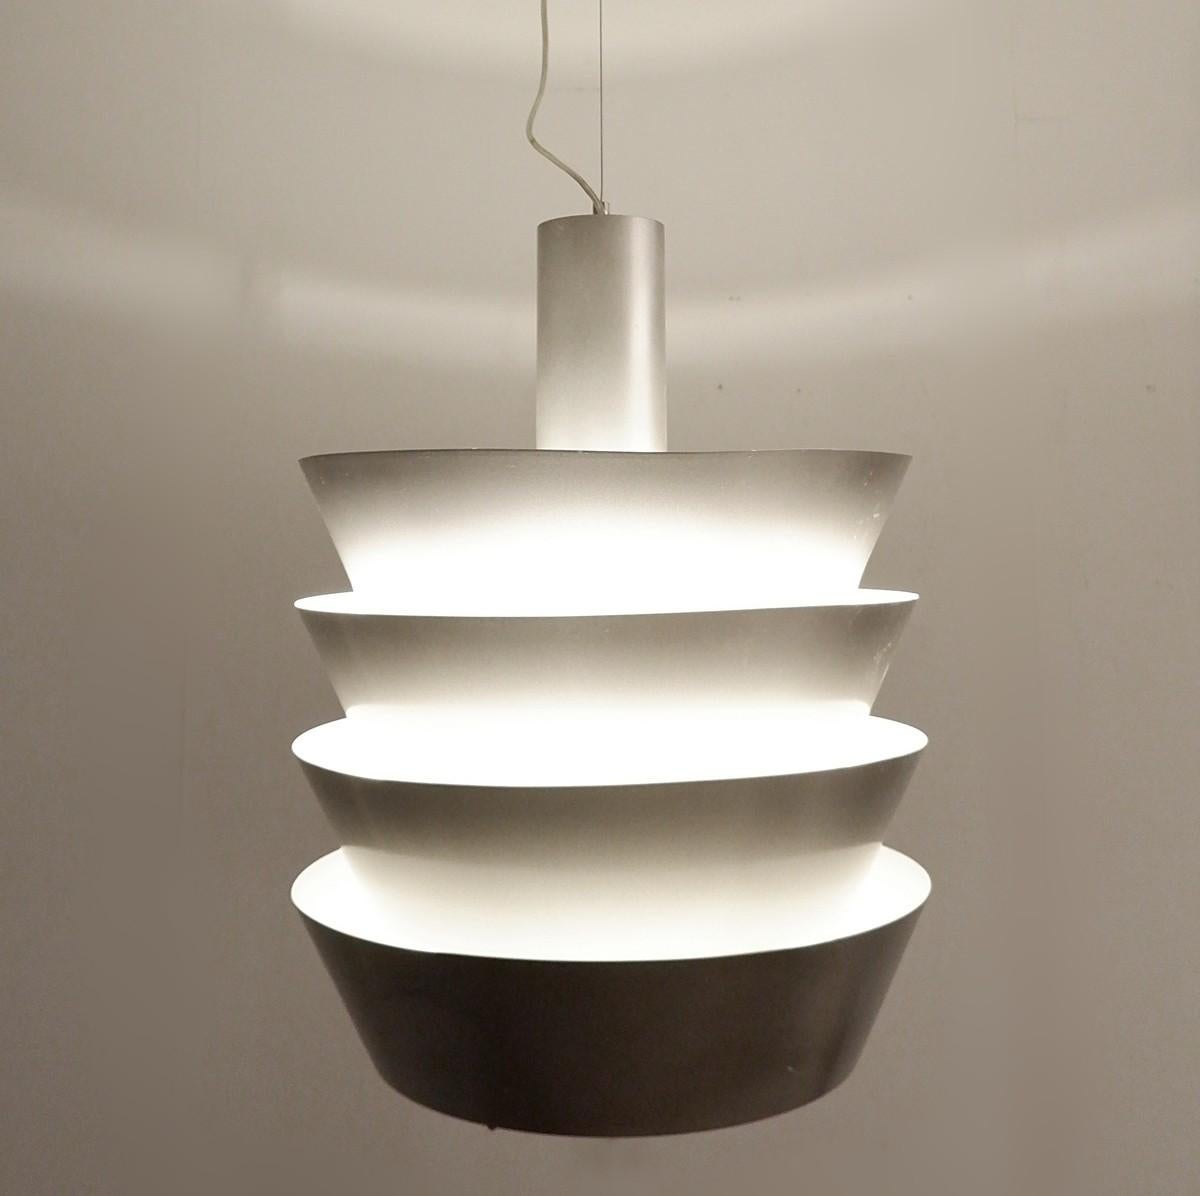 Italian pendant light in silver metal, 1960s
Variable height.